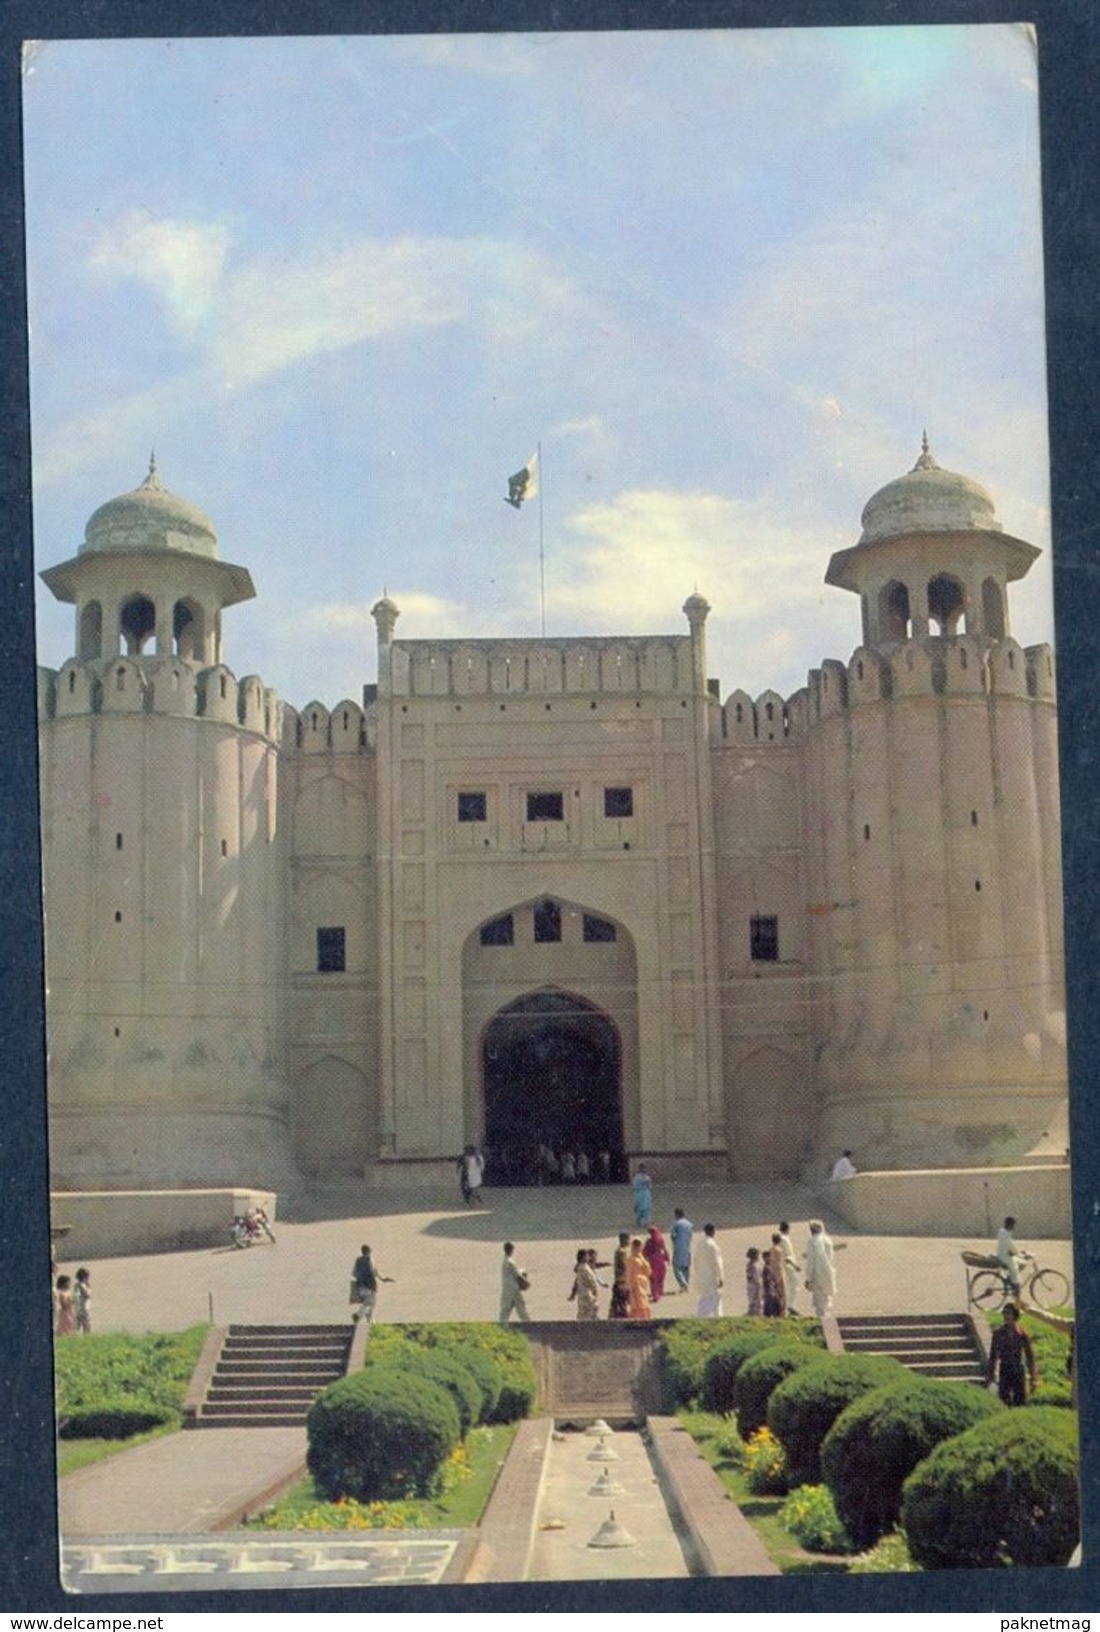 G16- Postal Used Post Card. Posted From Pakistan To England. UK. Allama Muhammad Iqbal. Flag. Lahore Fort. - Pakistan